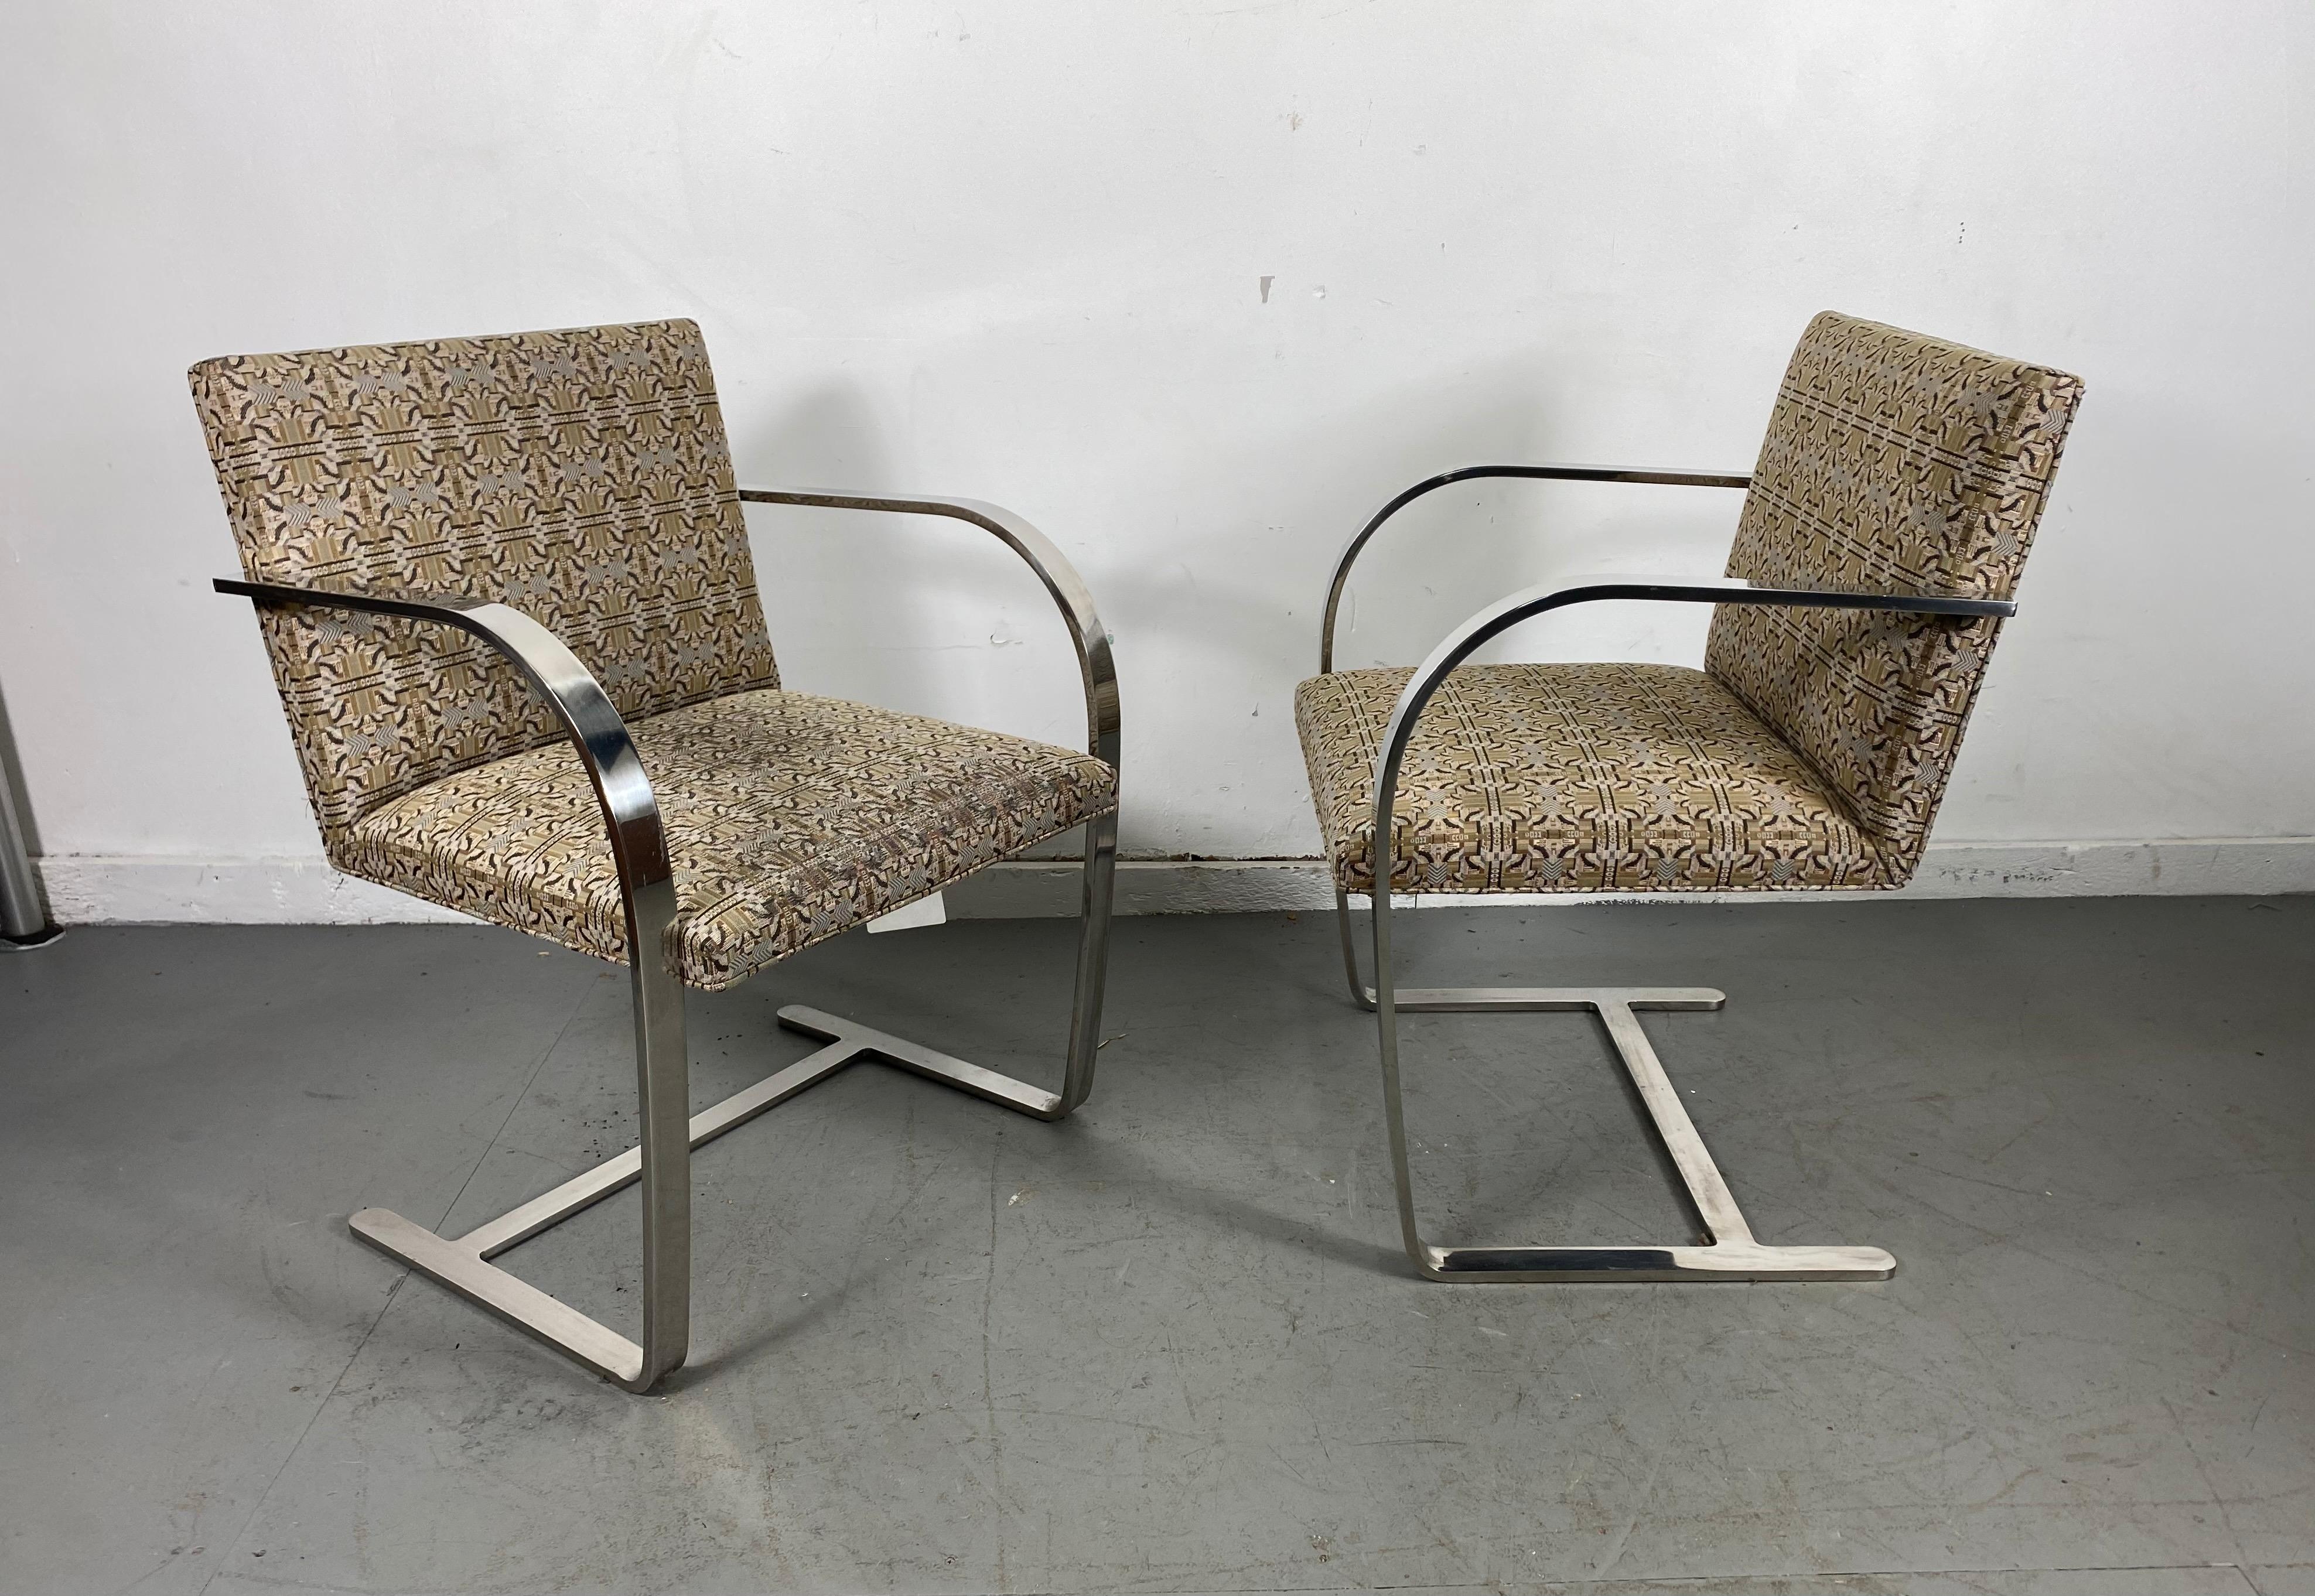 Bauhaus Classic Pair of Brno Chairs Designed by Mies Van Der Rohe for Knoll